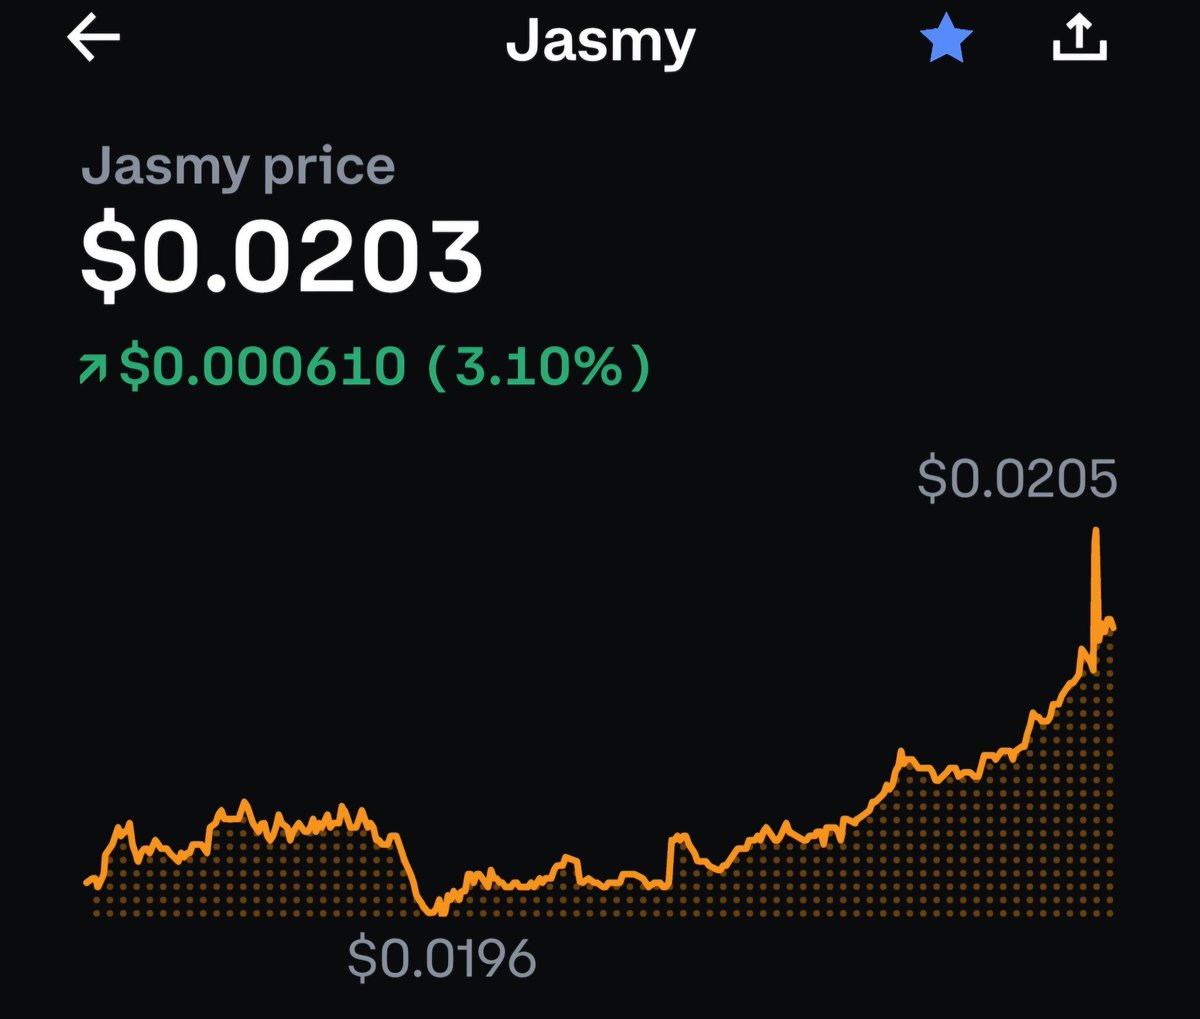 🛸 Be honest, how many of you sold your #Jasmy around $0.017-0.018? 🛸

$Jasmy